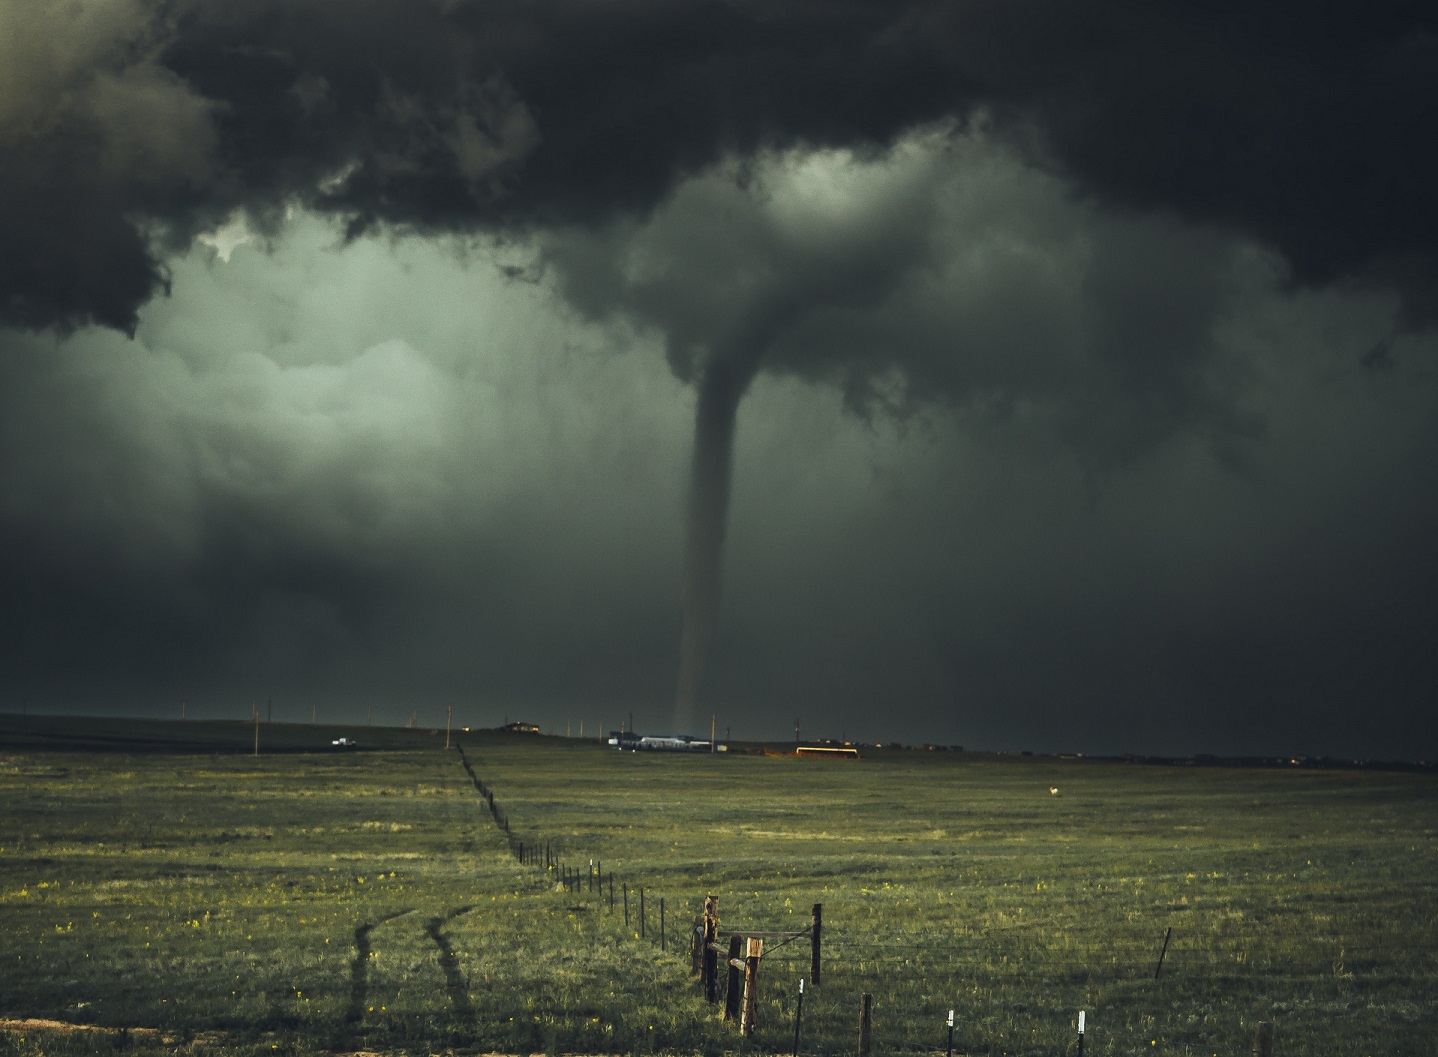 Thick, menacing clouds and a distant tornado dominate a rural landscape.